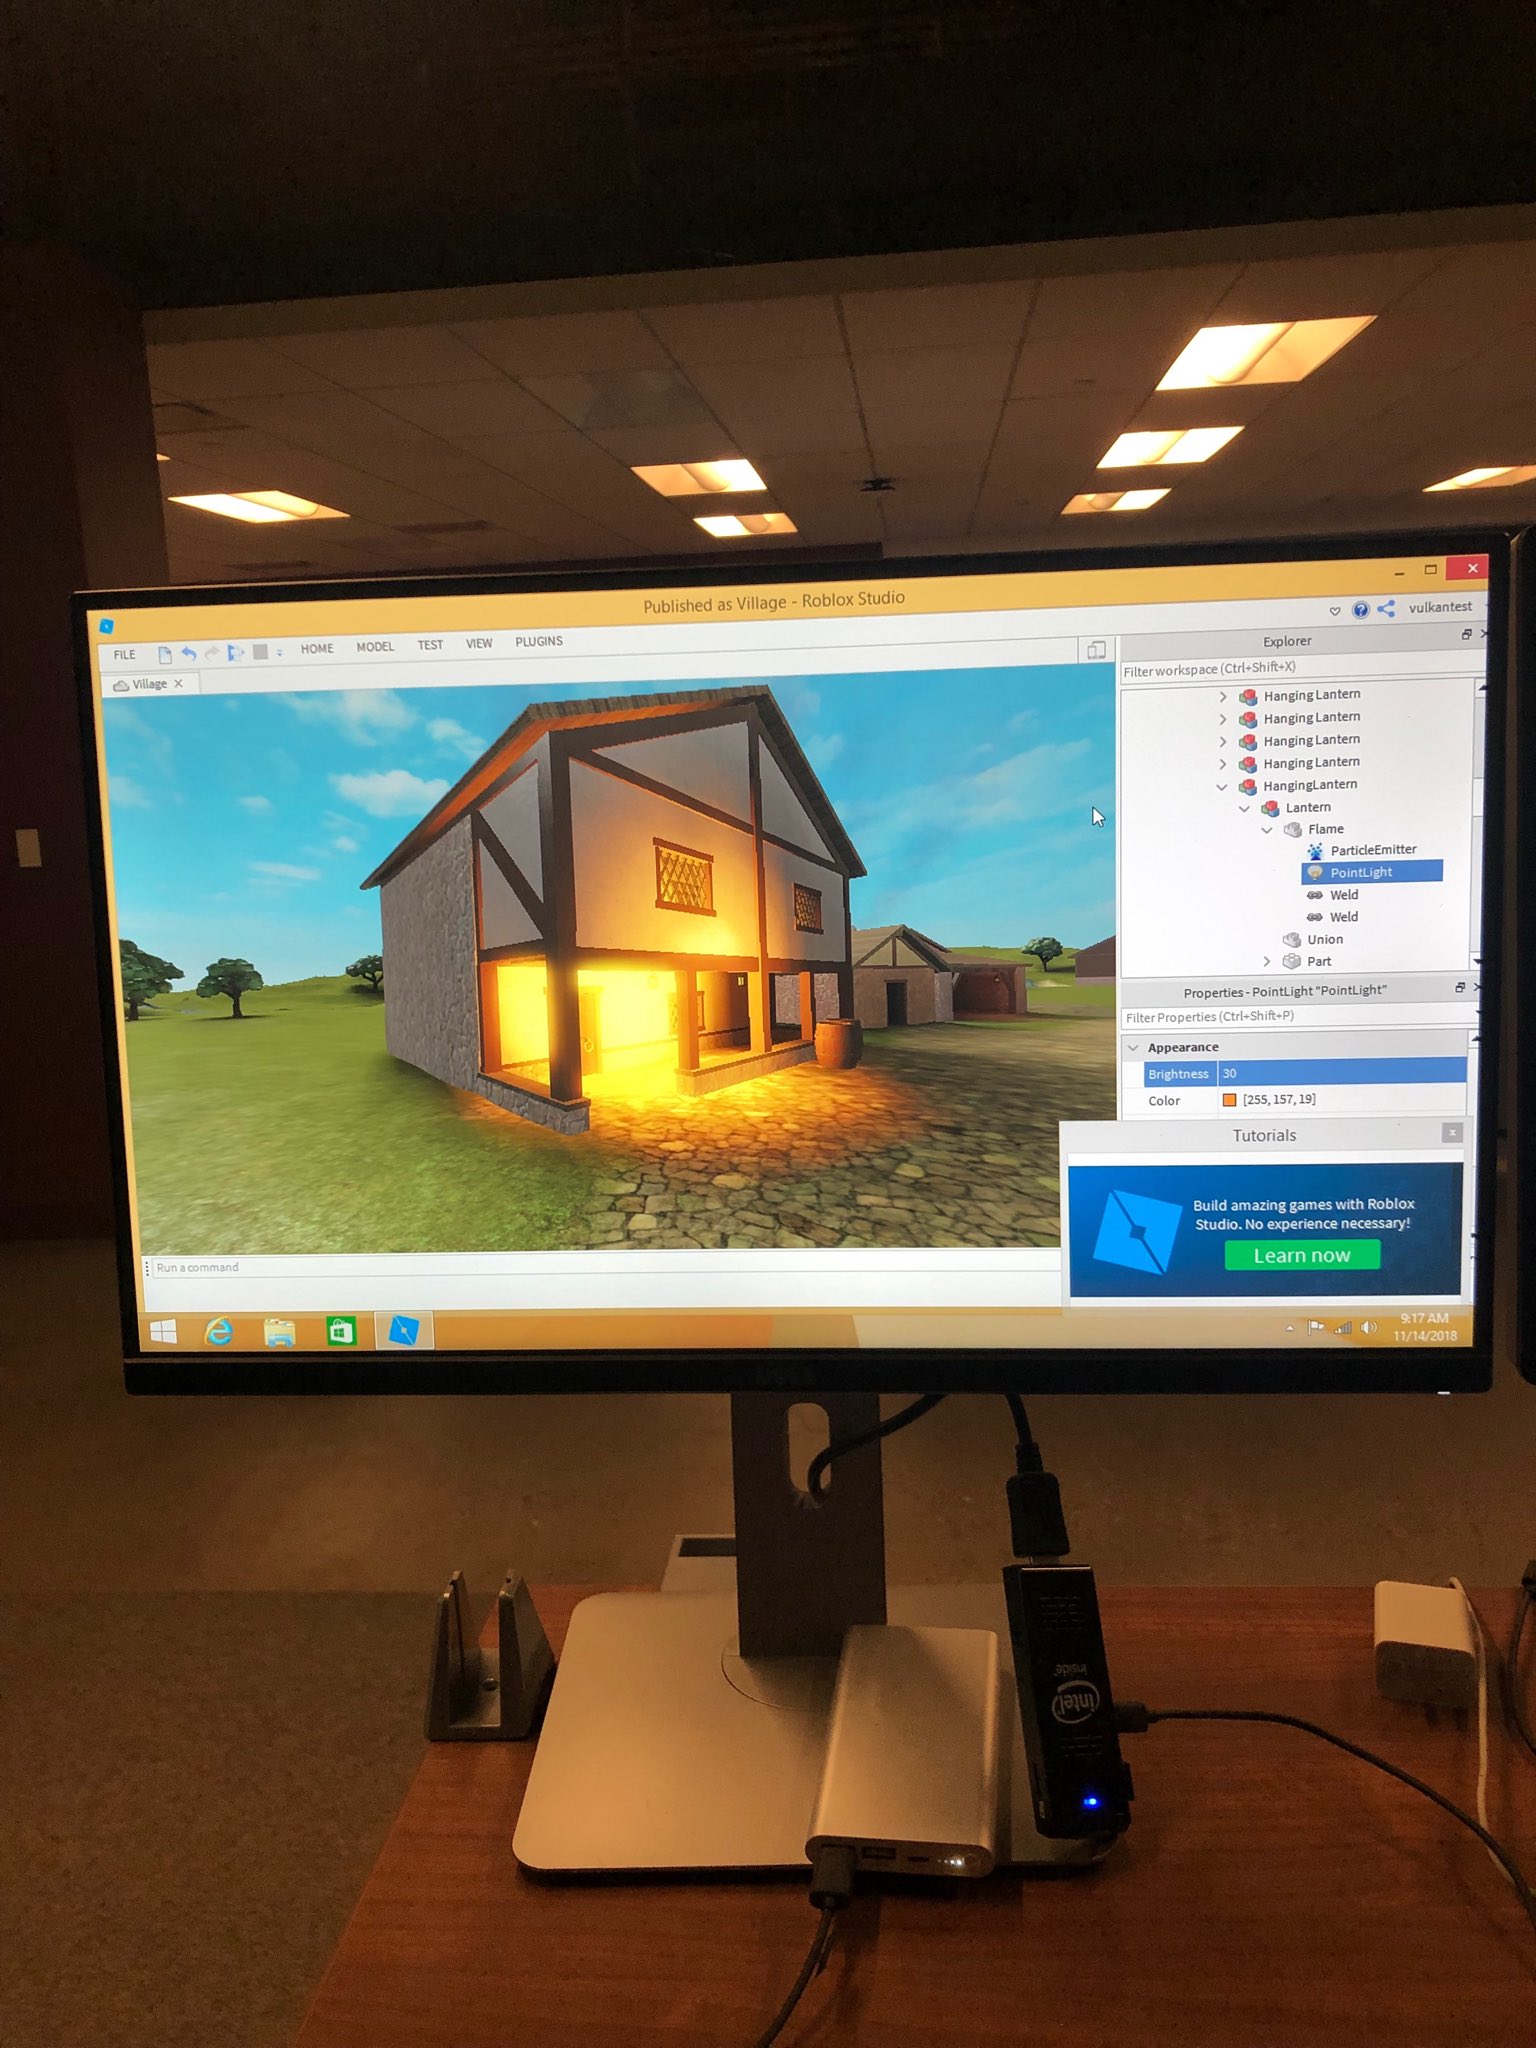 Arseny Kapoulkine On Twitter Roblox Future Is Bright Phase 1 Running On A 35 Computer Hanging Under The Monitor Using A Phone Battery Pack Next To It At 20 Fps Https T Co 2jbow65zoi - roblox monitor